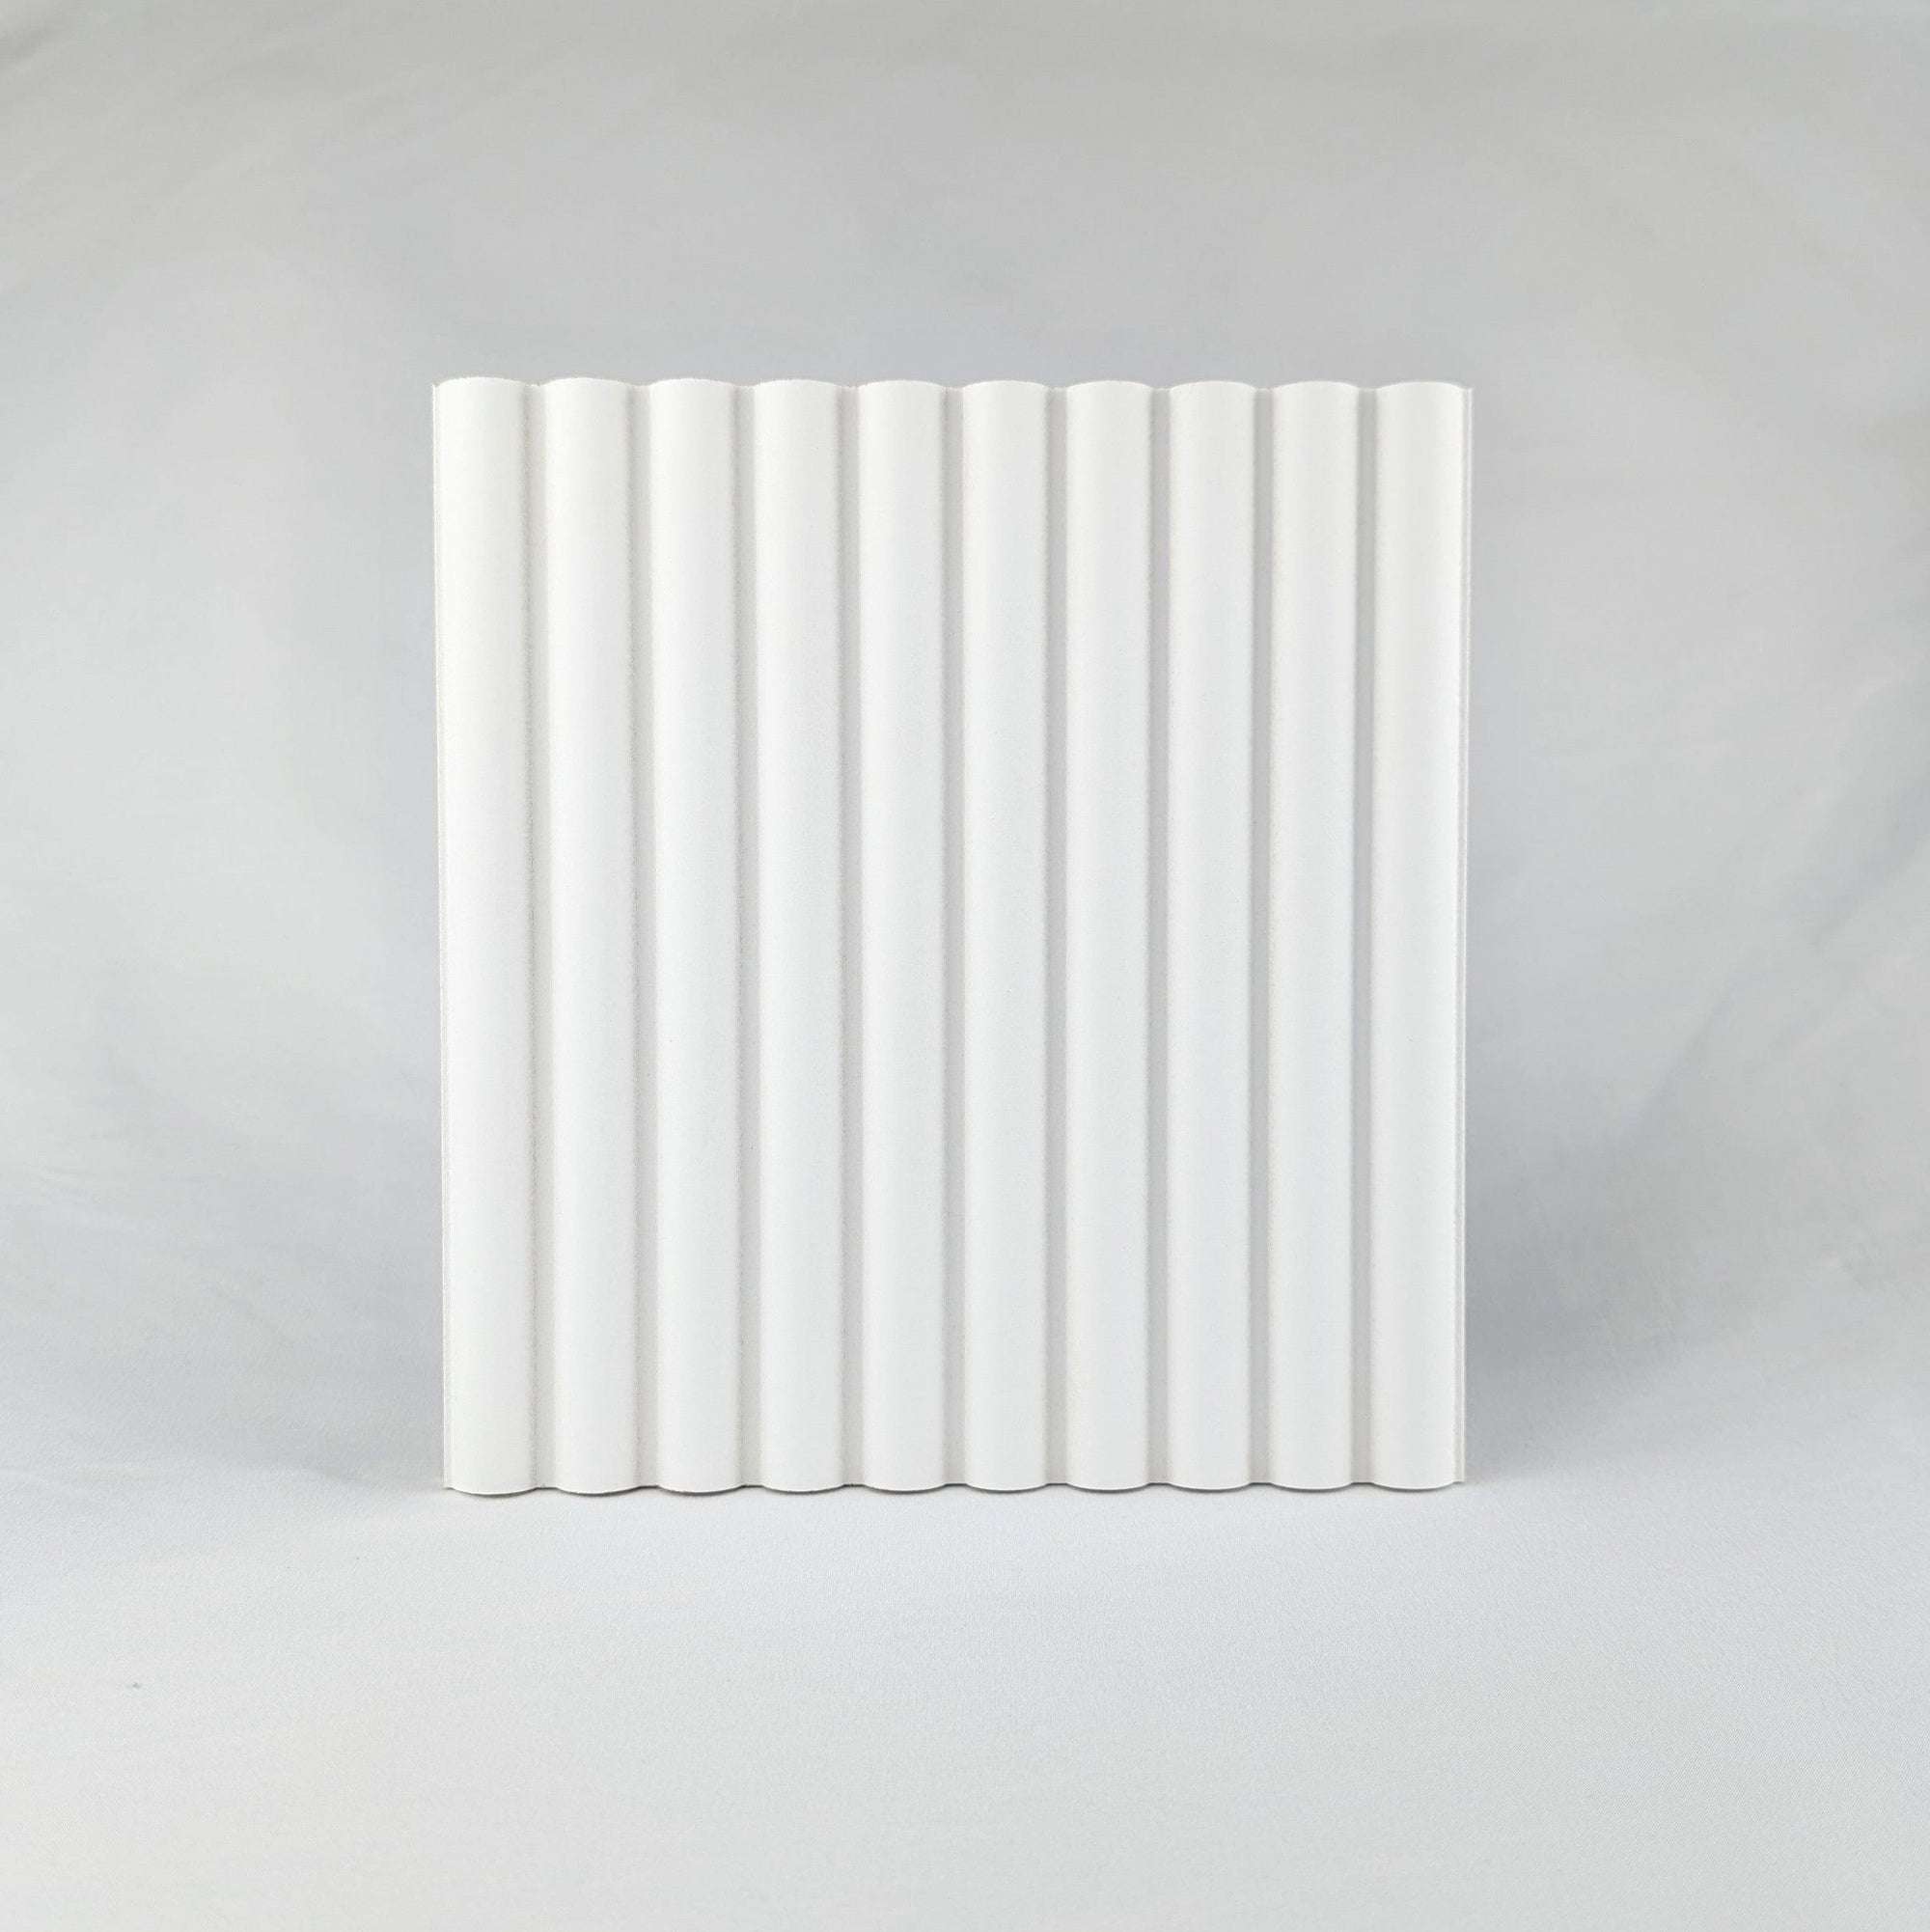 Walston Architectural Products Wall Panel Reeded (3/4" Reeds) / Primed White MDF 8″ X 8″ SAMPLES: FLUTED, REEDED, OR SLAT WALL PANELS / WALL CLADDING